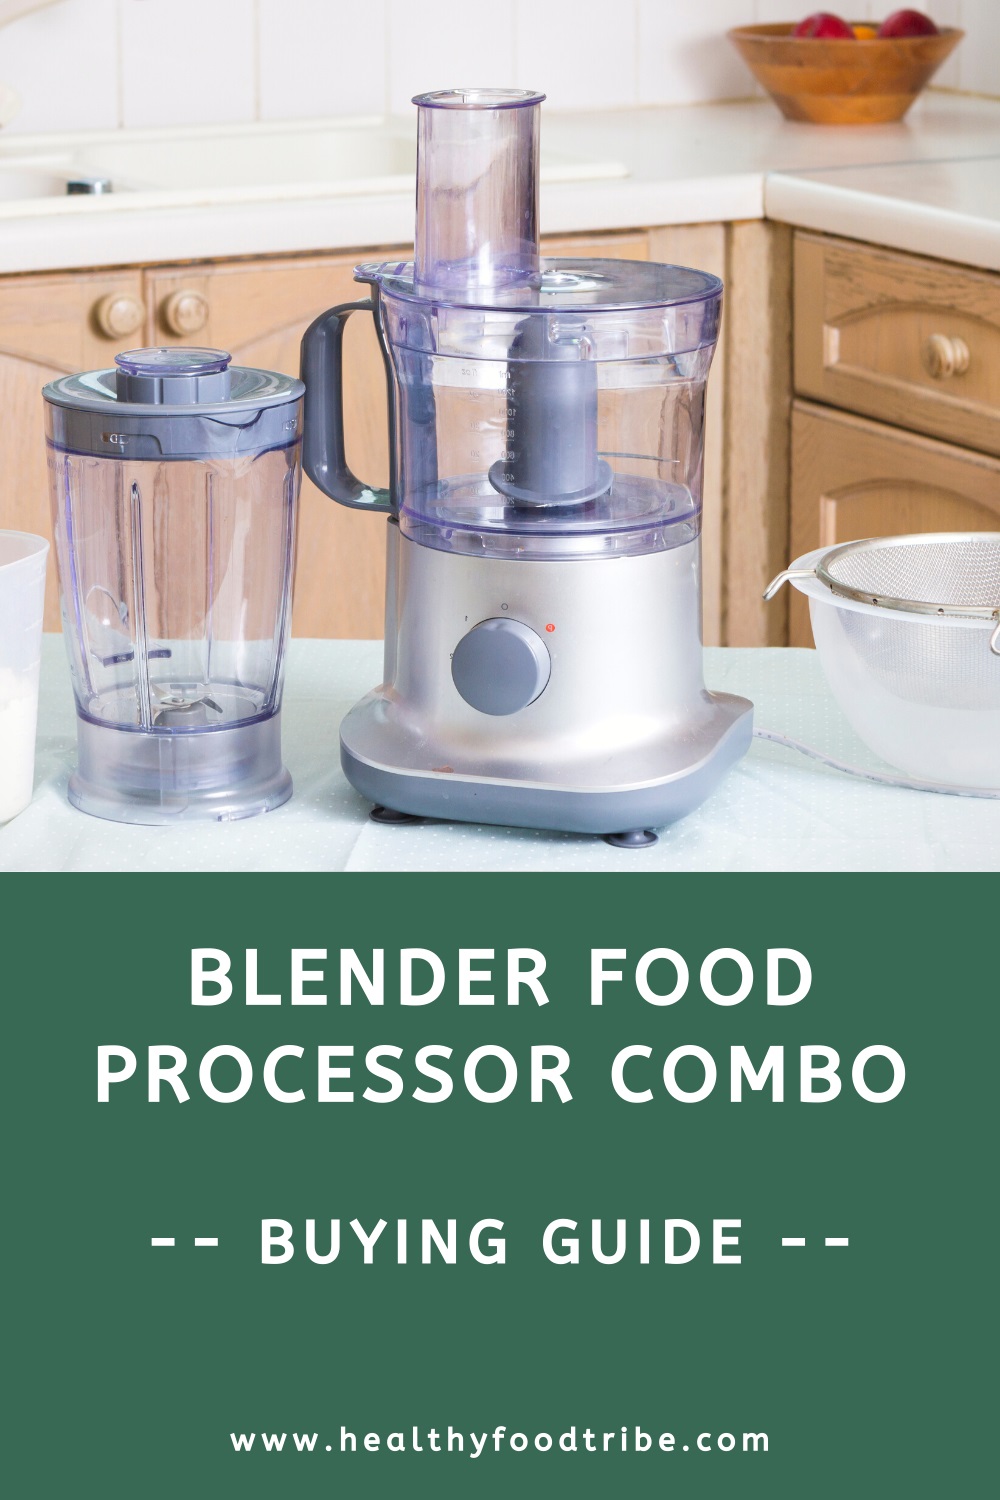 Blender food processor combo buying guide